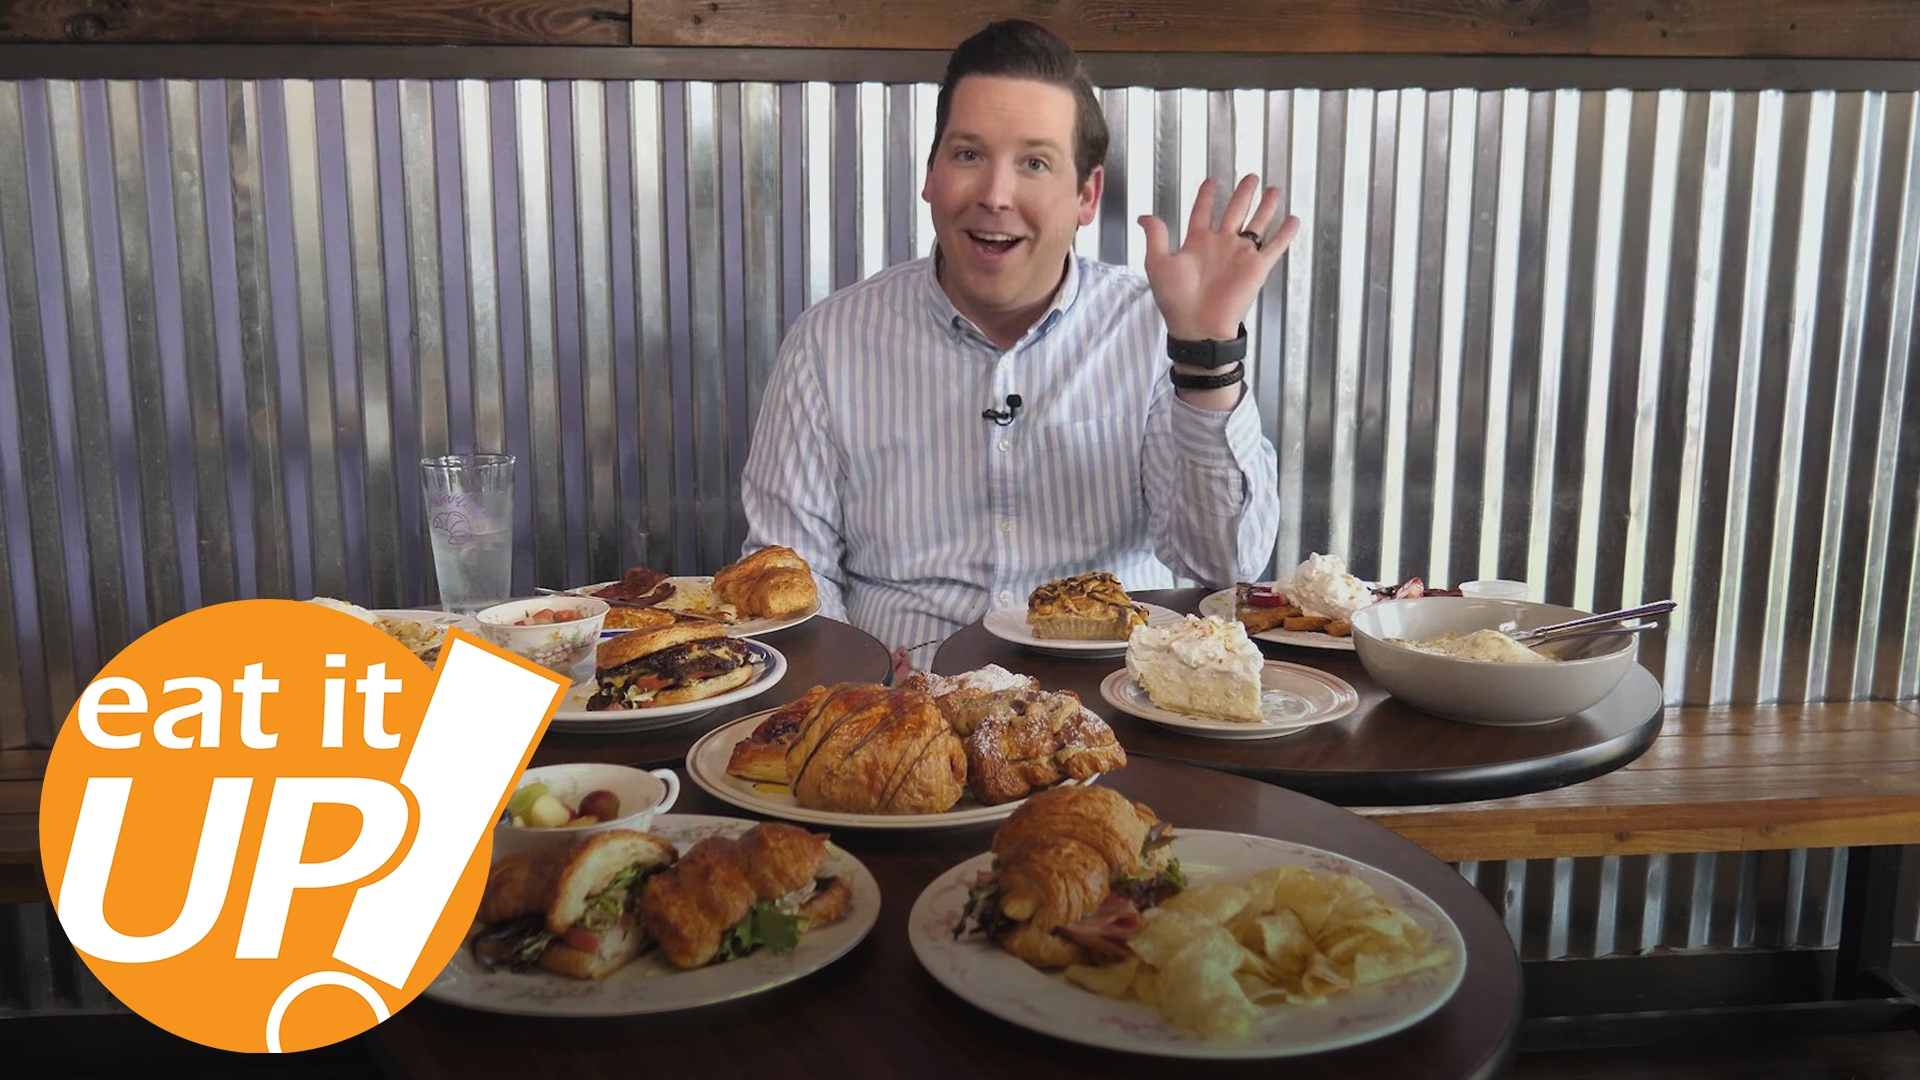 On this week's Eat It Up, Hayden Balgavy visits the Croissanterie in west Little Rock, a delicious breakfast & brunch spot where everything is made from scratch.